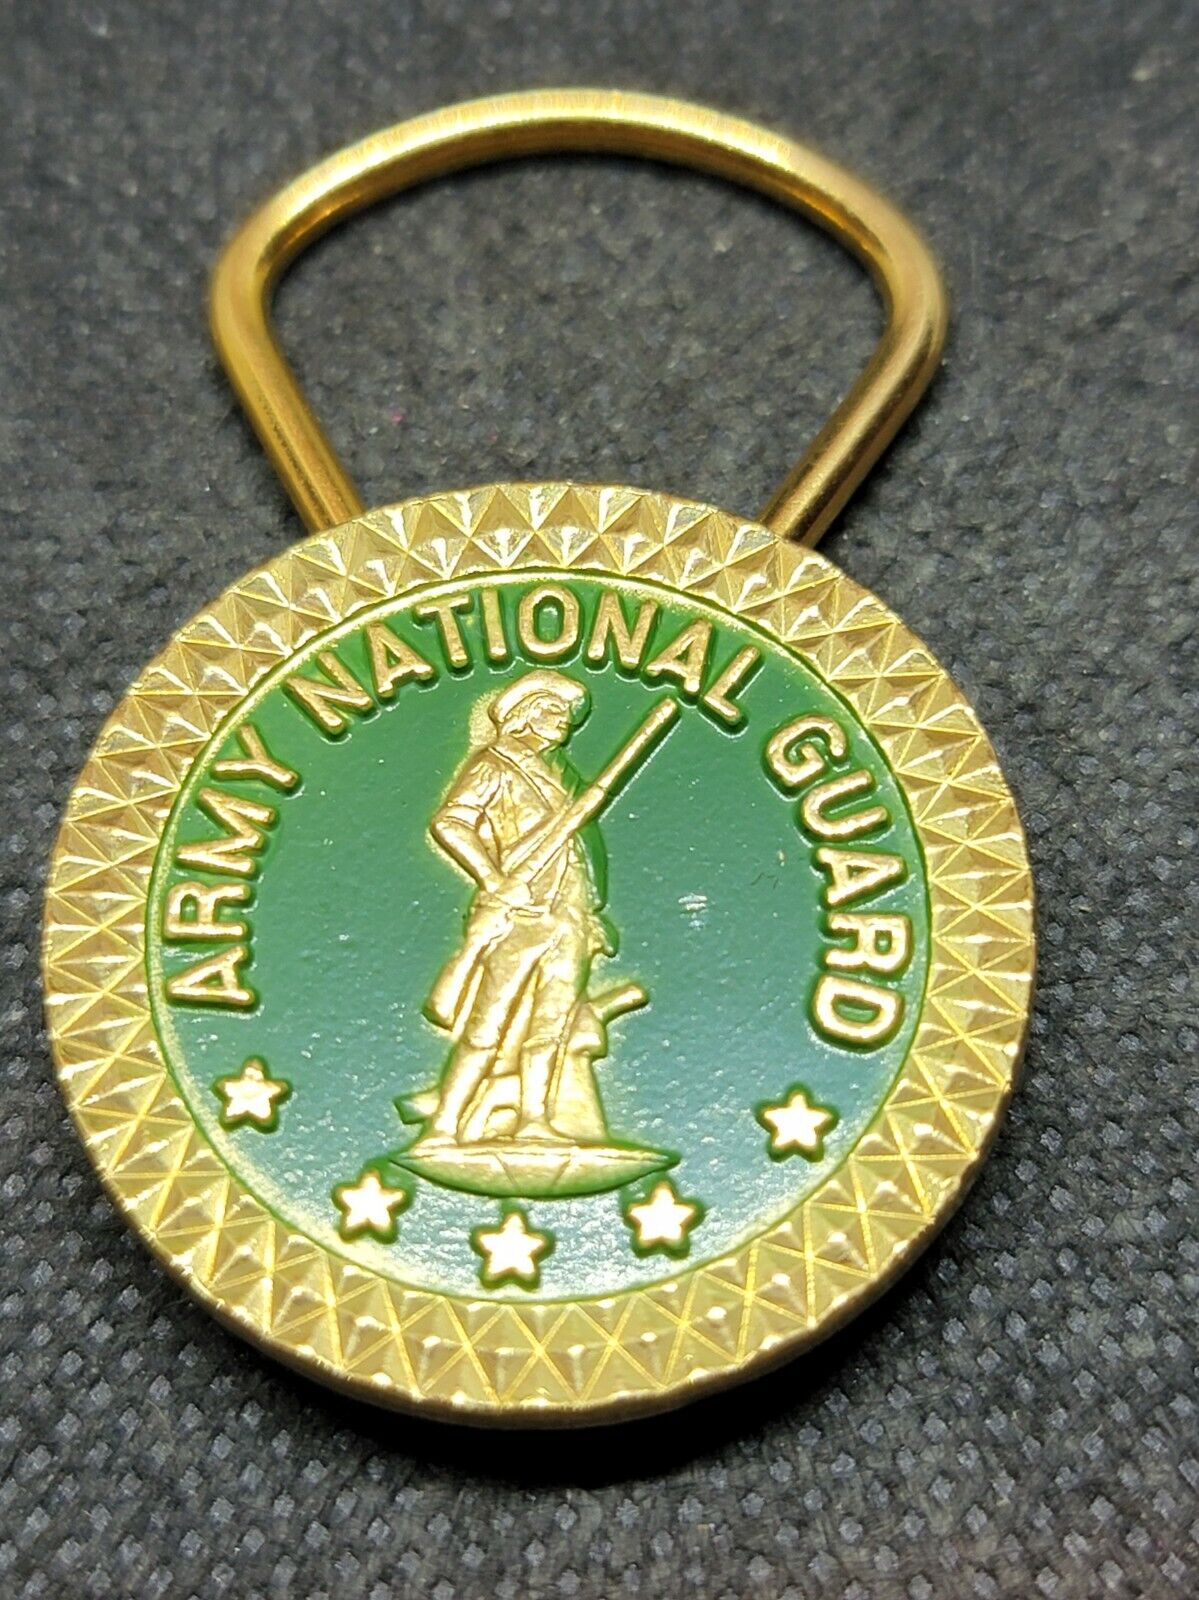 Never Used Army National Guard Key Ring, See Pictures L1259